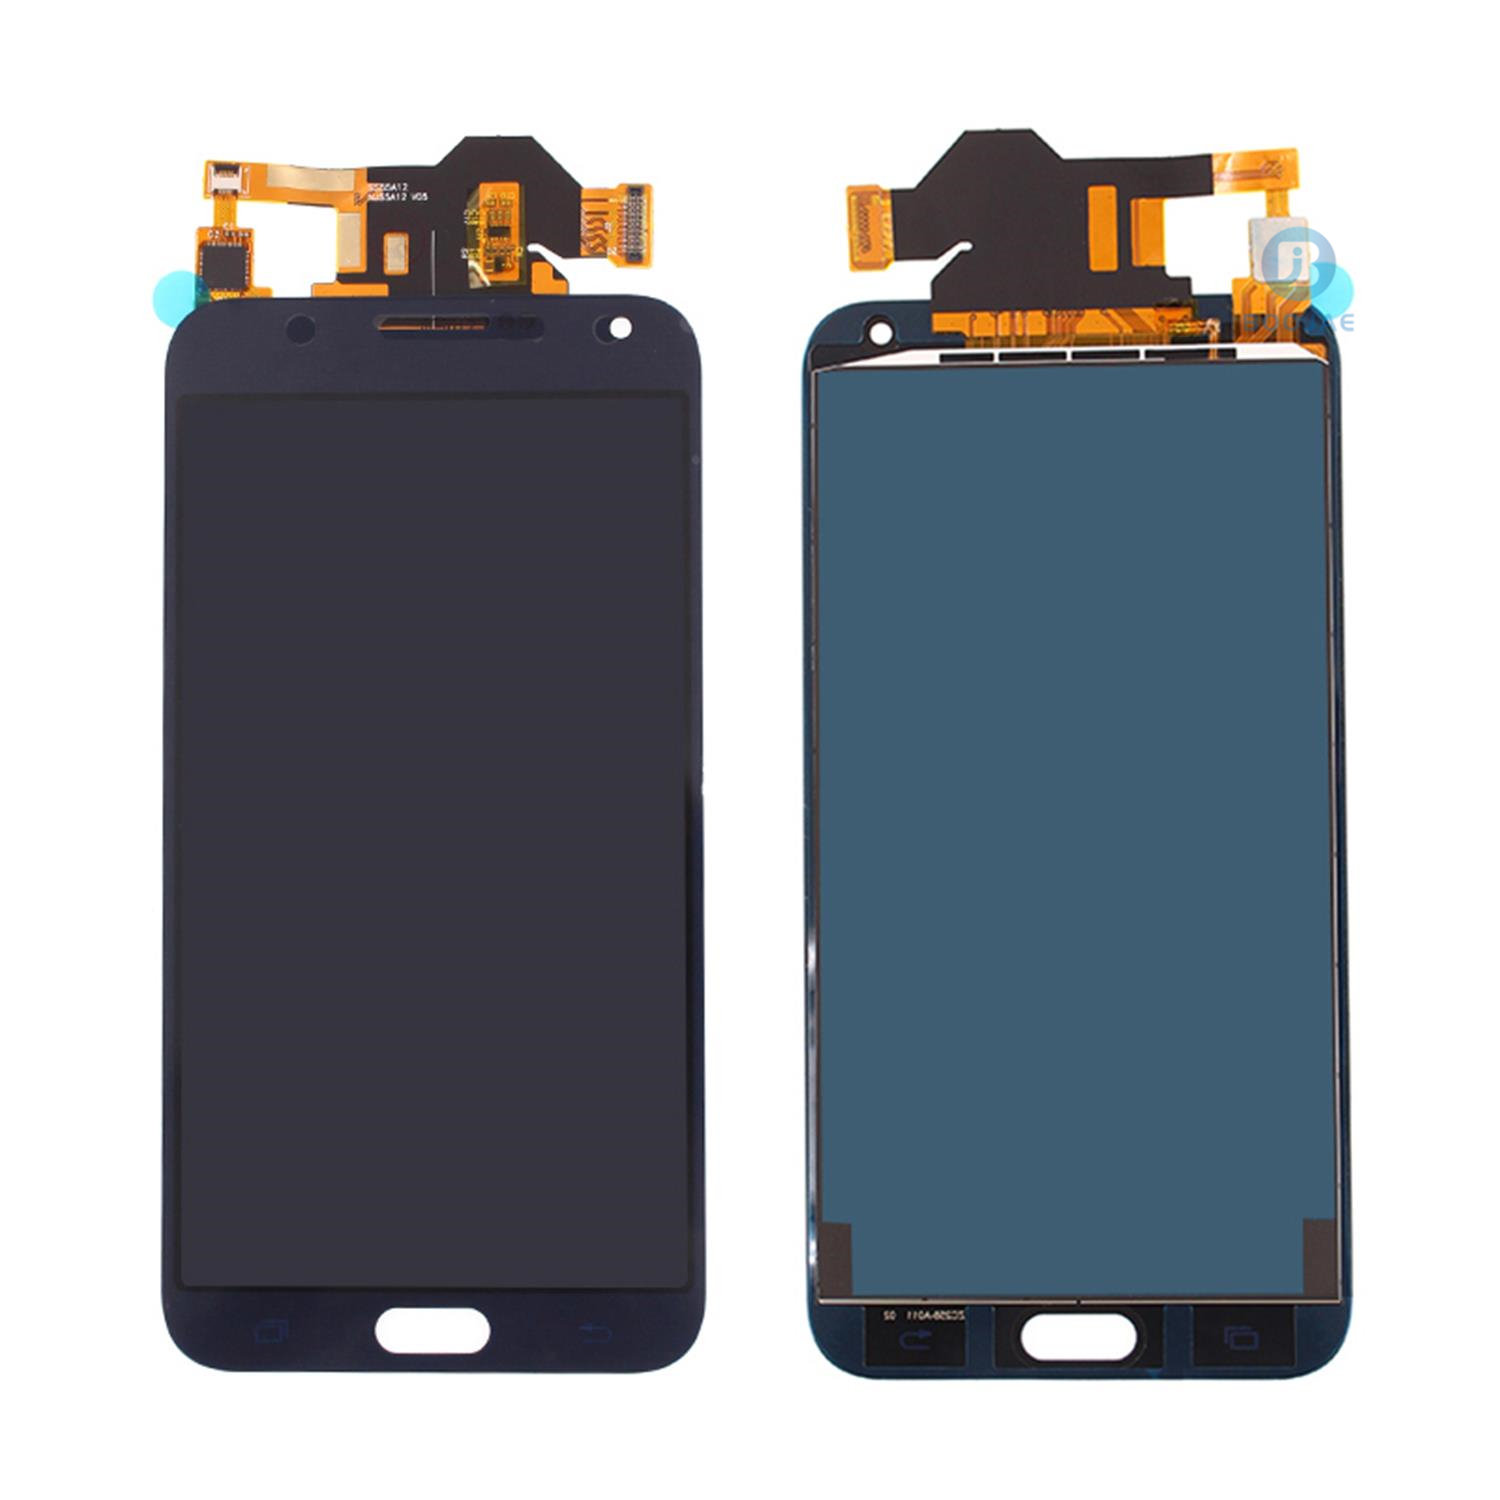 For Samsung Galaxy E7 LCD Screen Display and Touch Panel Digitizer Assembly Replacement